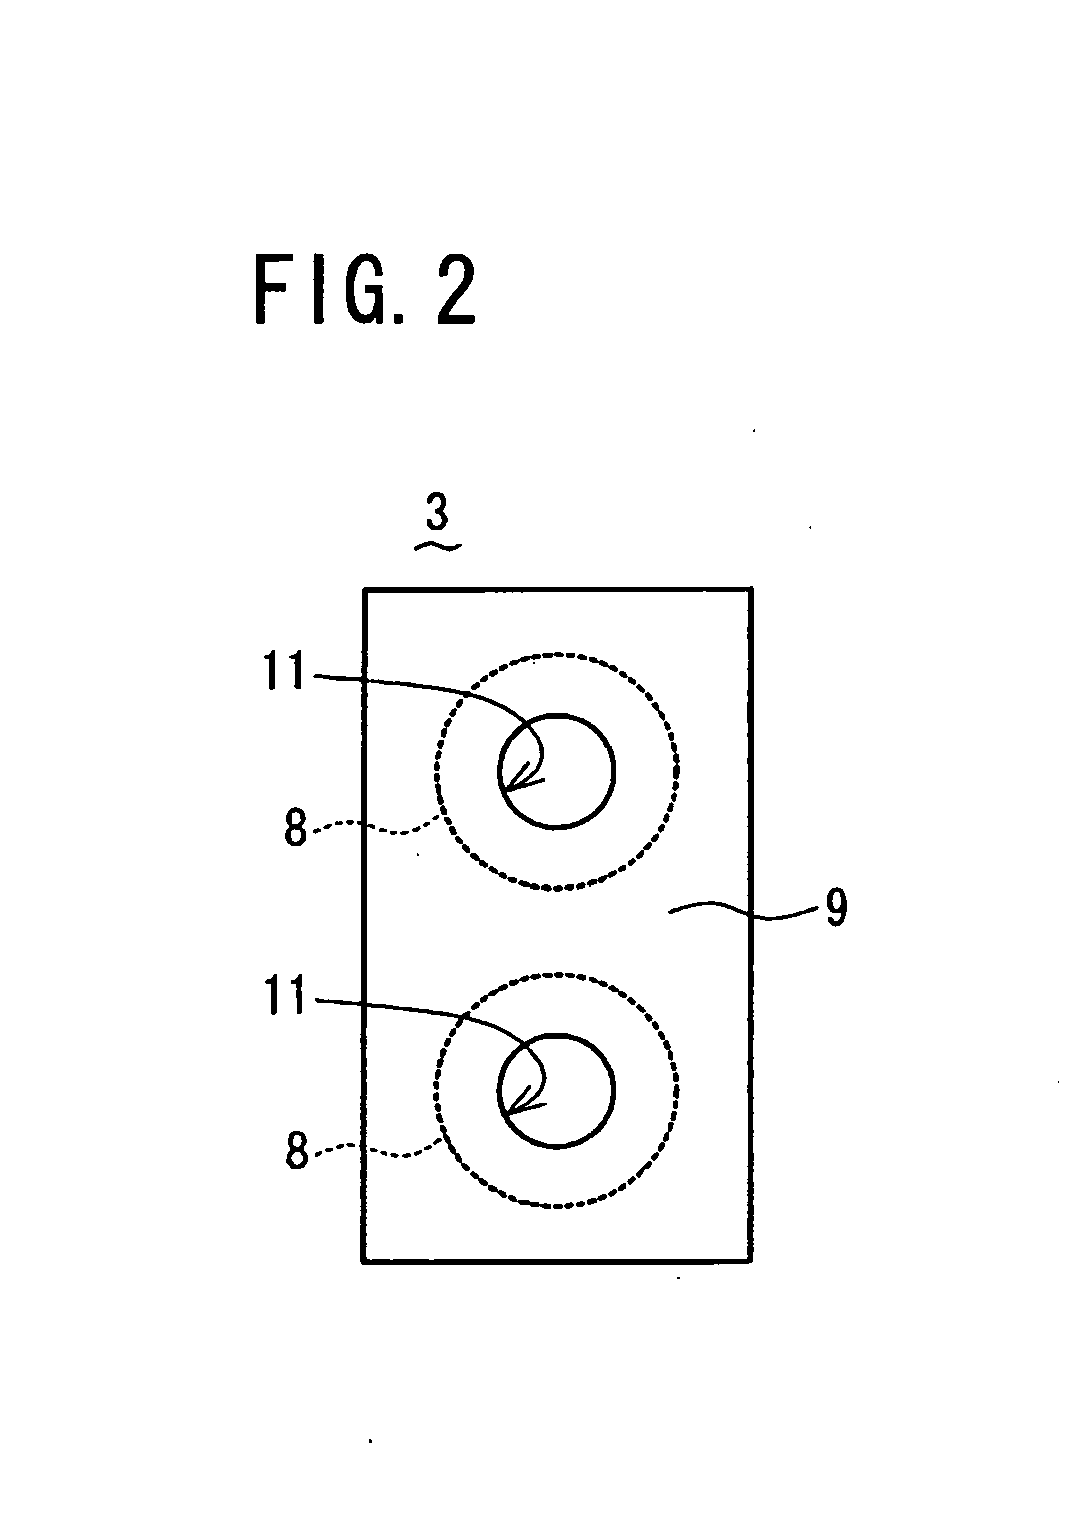 Skin Area Detection Imaging Device